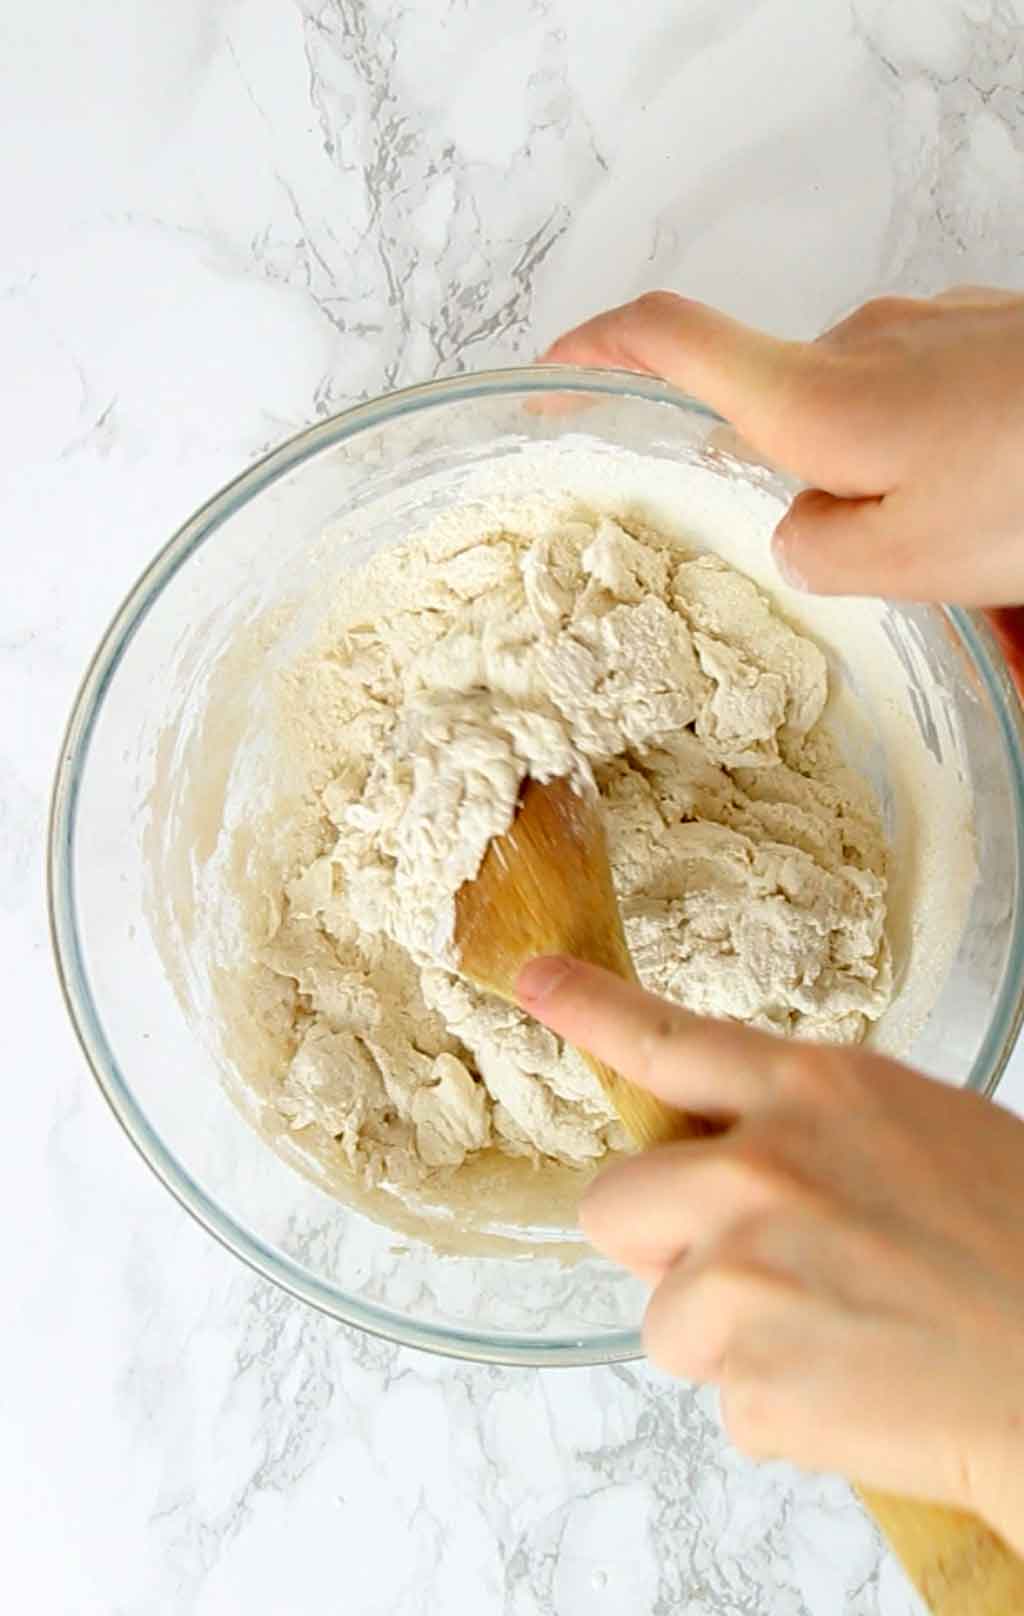 Mixing The Scone Dough In A Bowl